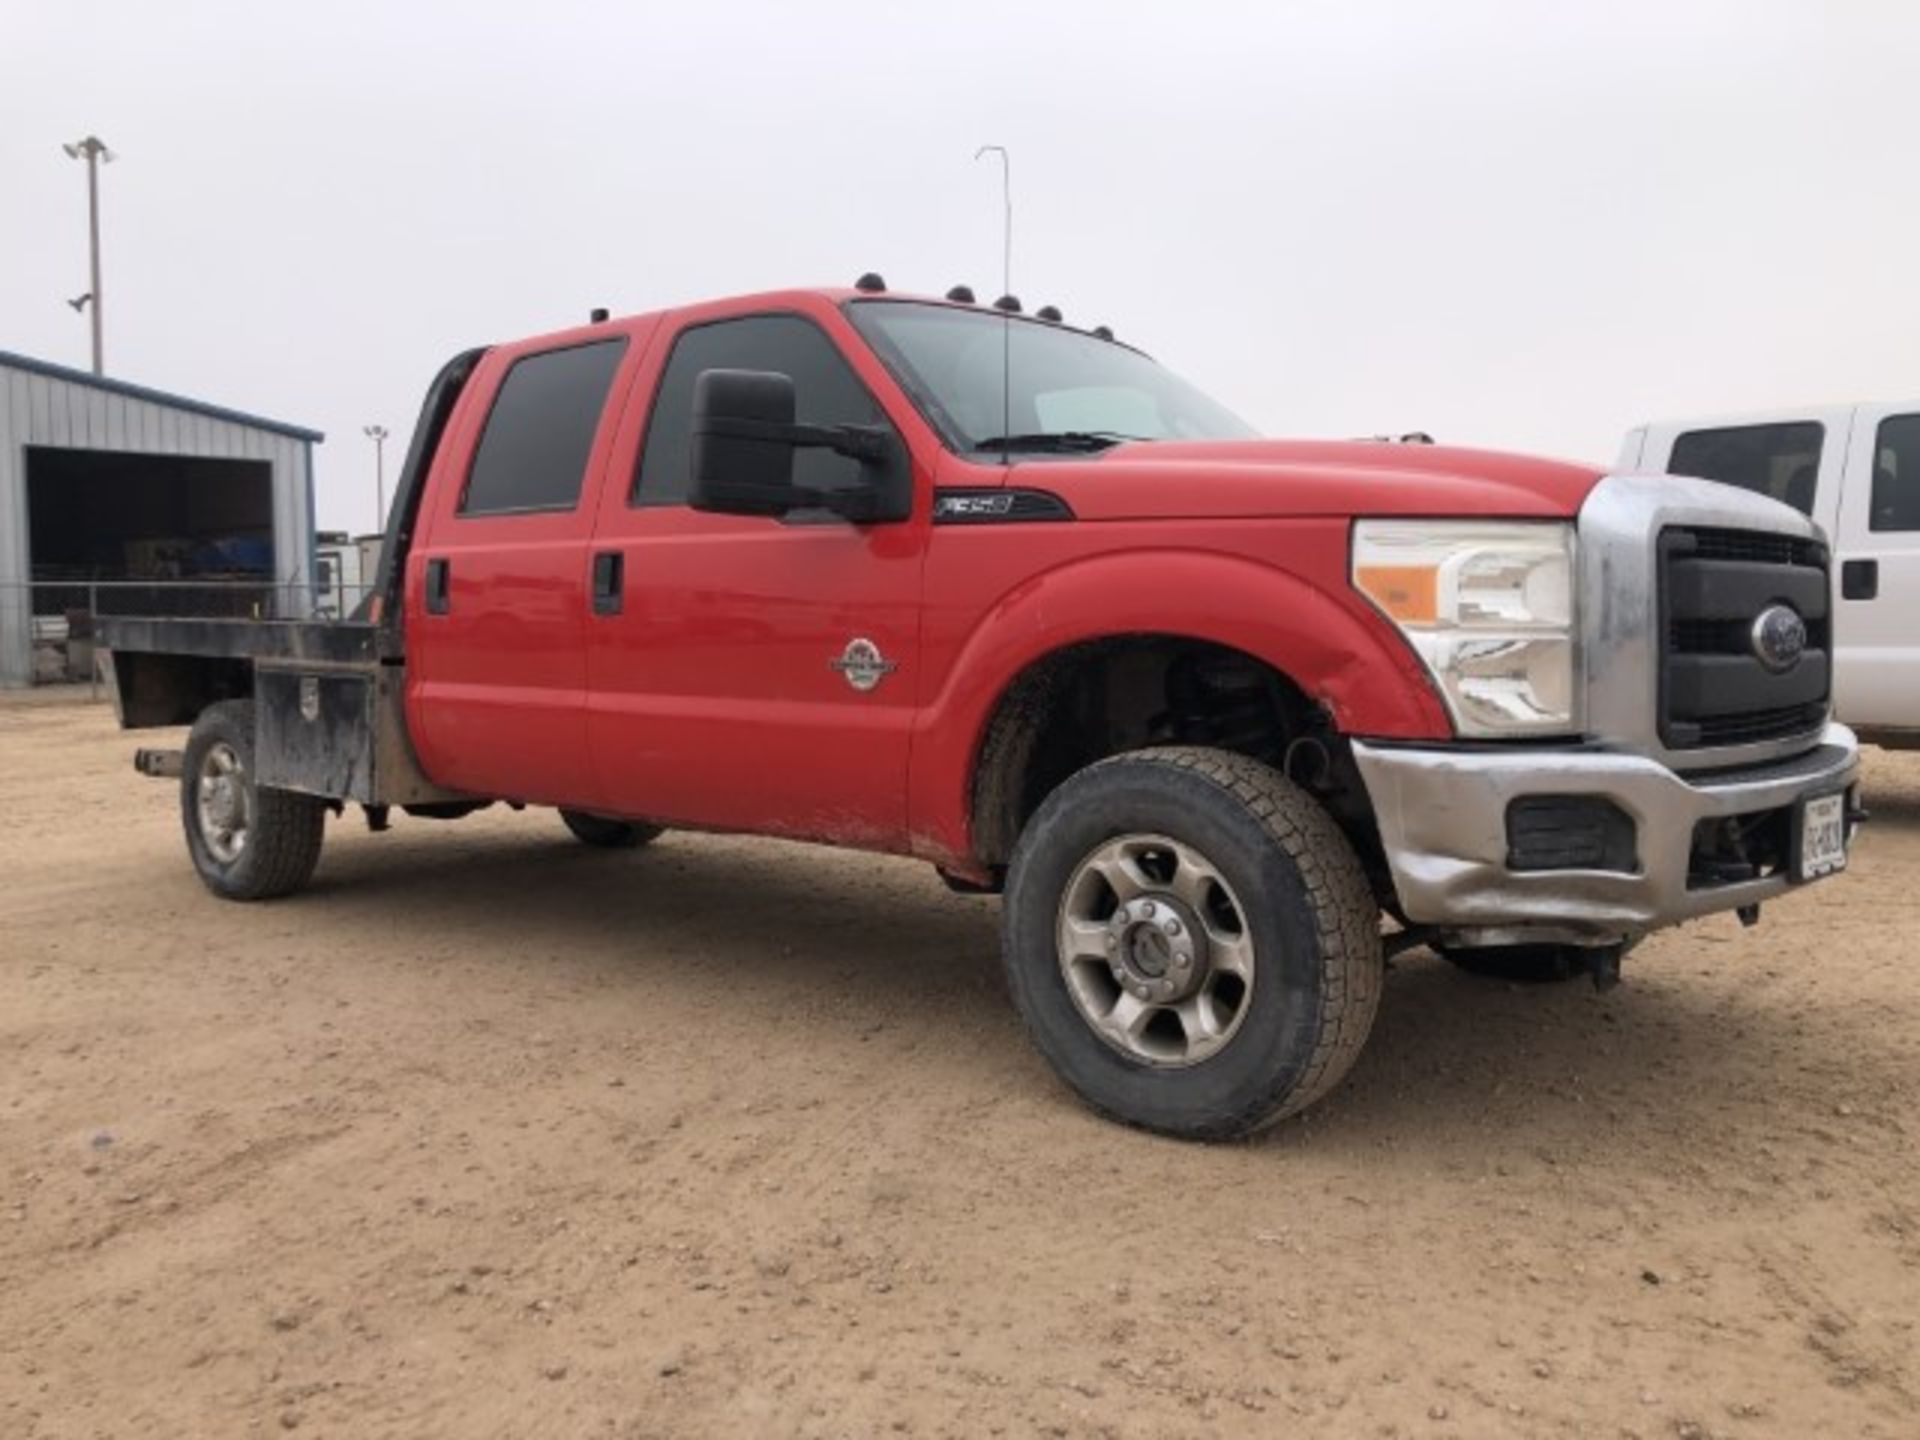 2016 Ford F-350 Flatbed VIN: 1FT8W3BT1GEA74471 Odometer States: 184290 Colo - Image 2 of 6